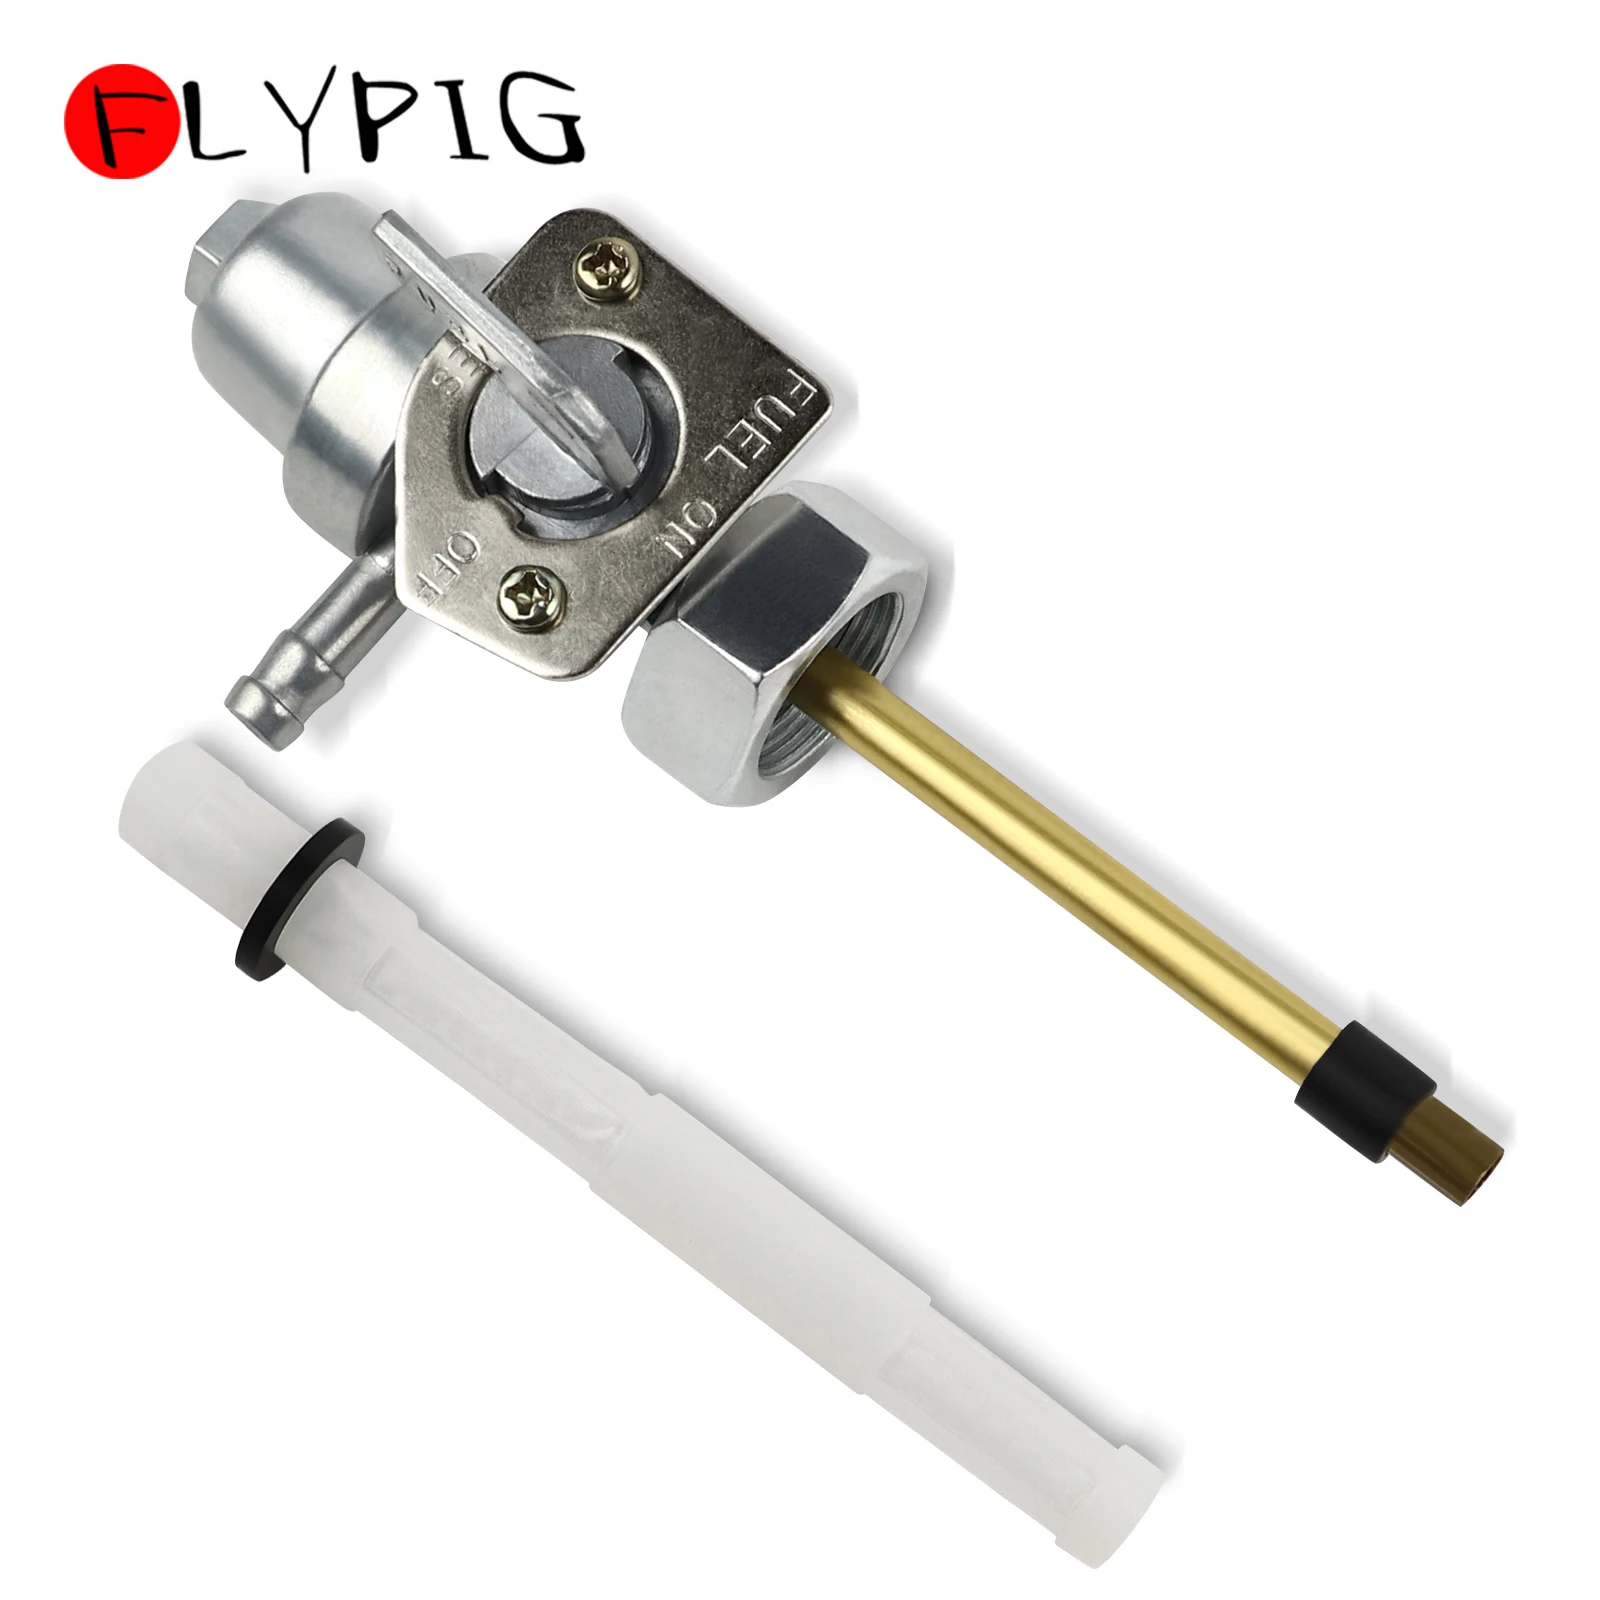 FLYPIG 18mm Gas Fuel Tank Switch Cock Tap Valve Petcock For Honda XL250R XR250L XL350R XL600R VF700C VF750C 16950-KBR-000